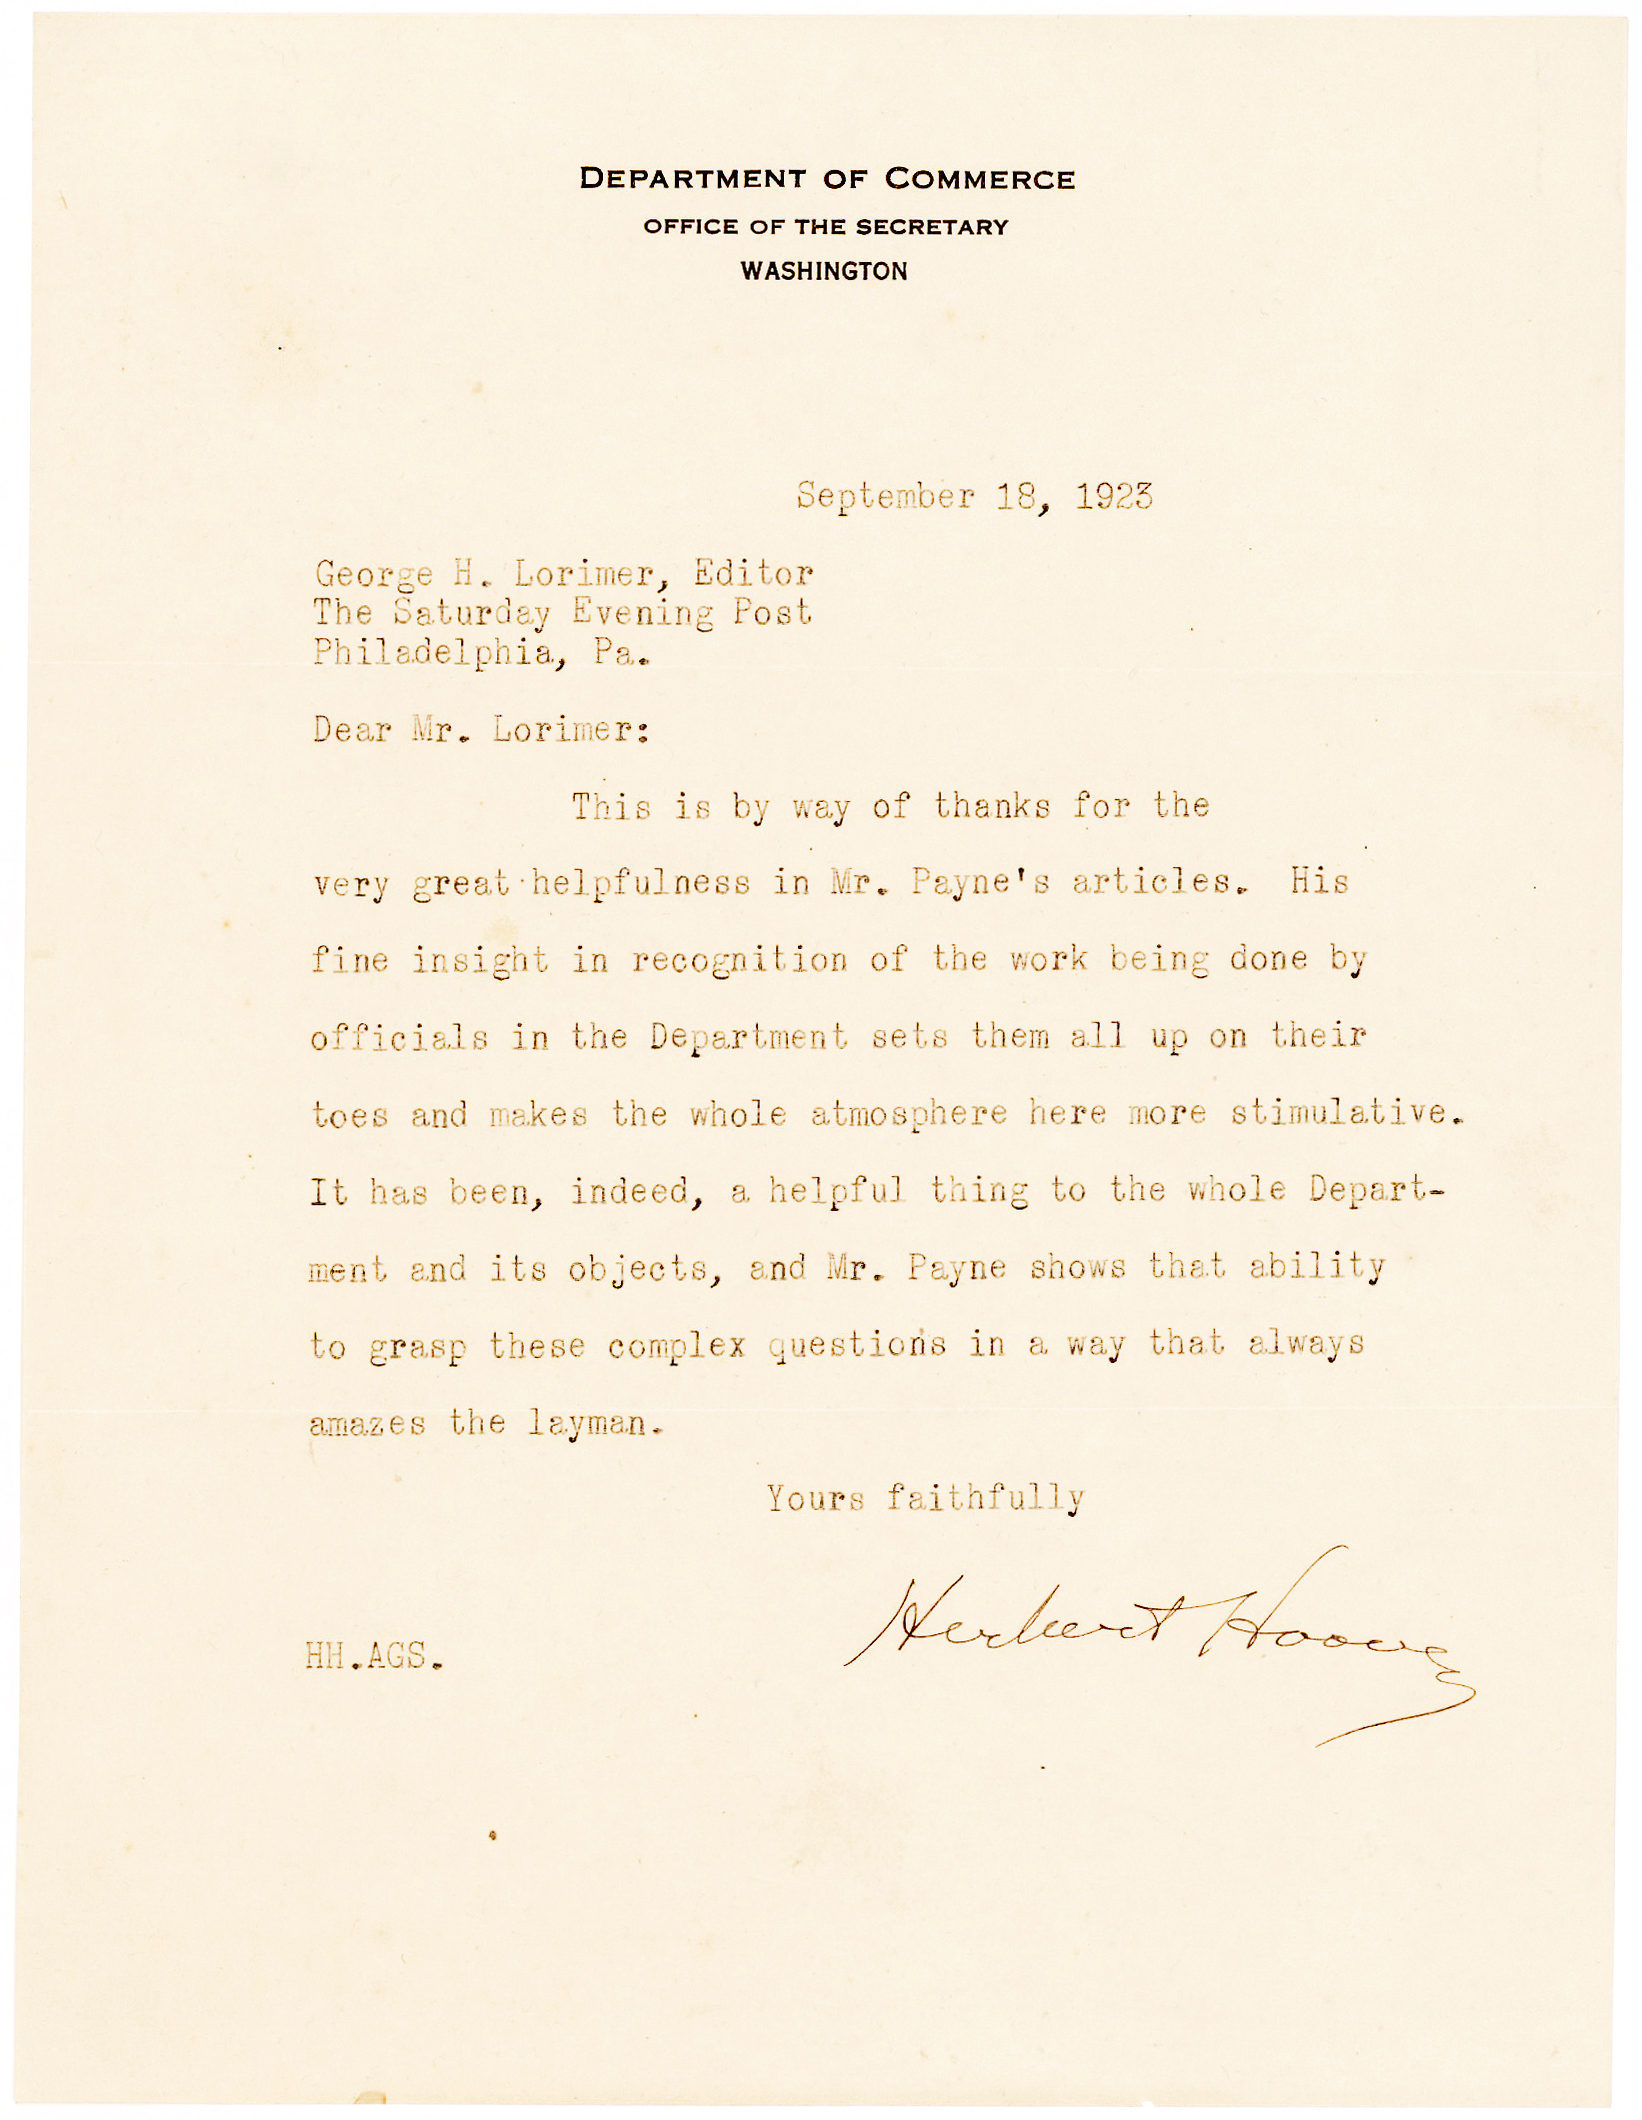 Herbert Hoover Letter to the Editor of the Saturday Evening Post: “… A way that always amazes the layman”